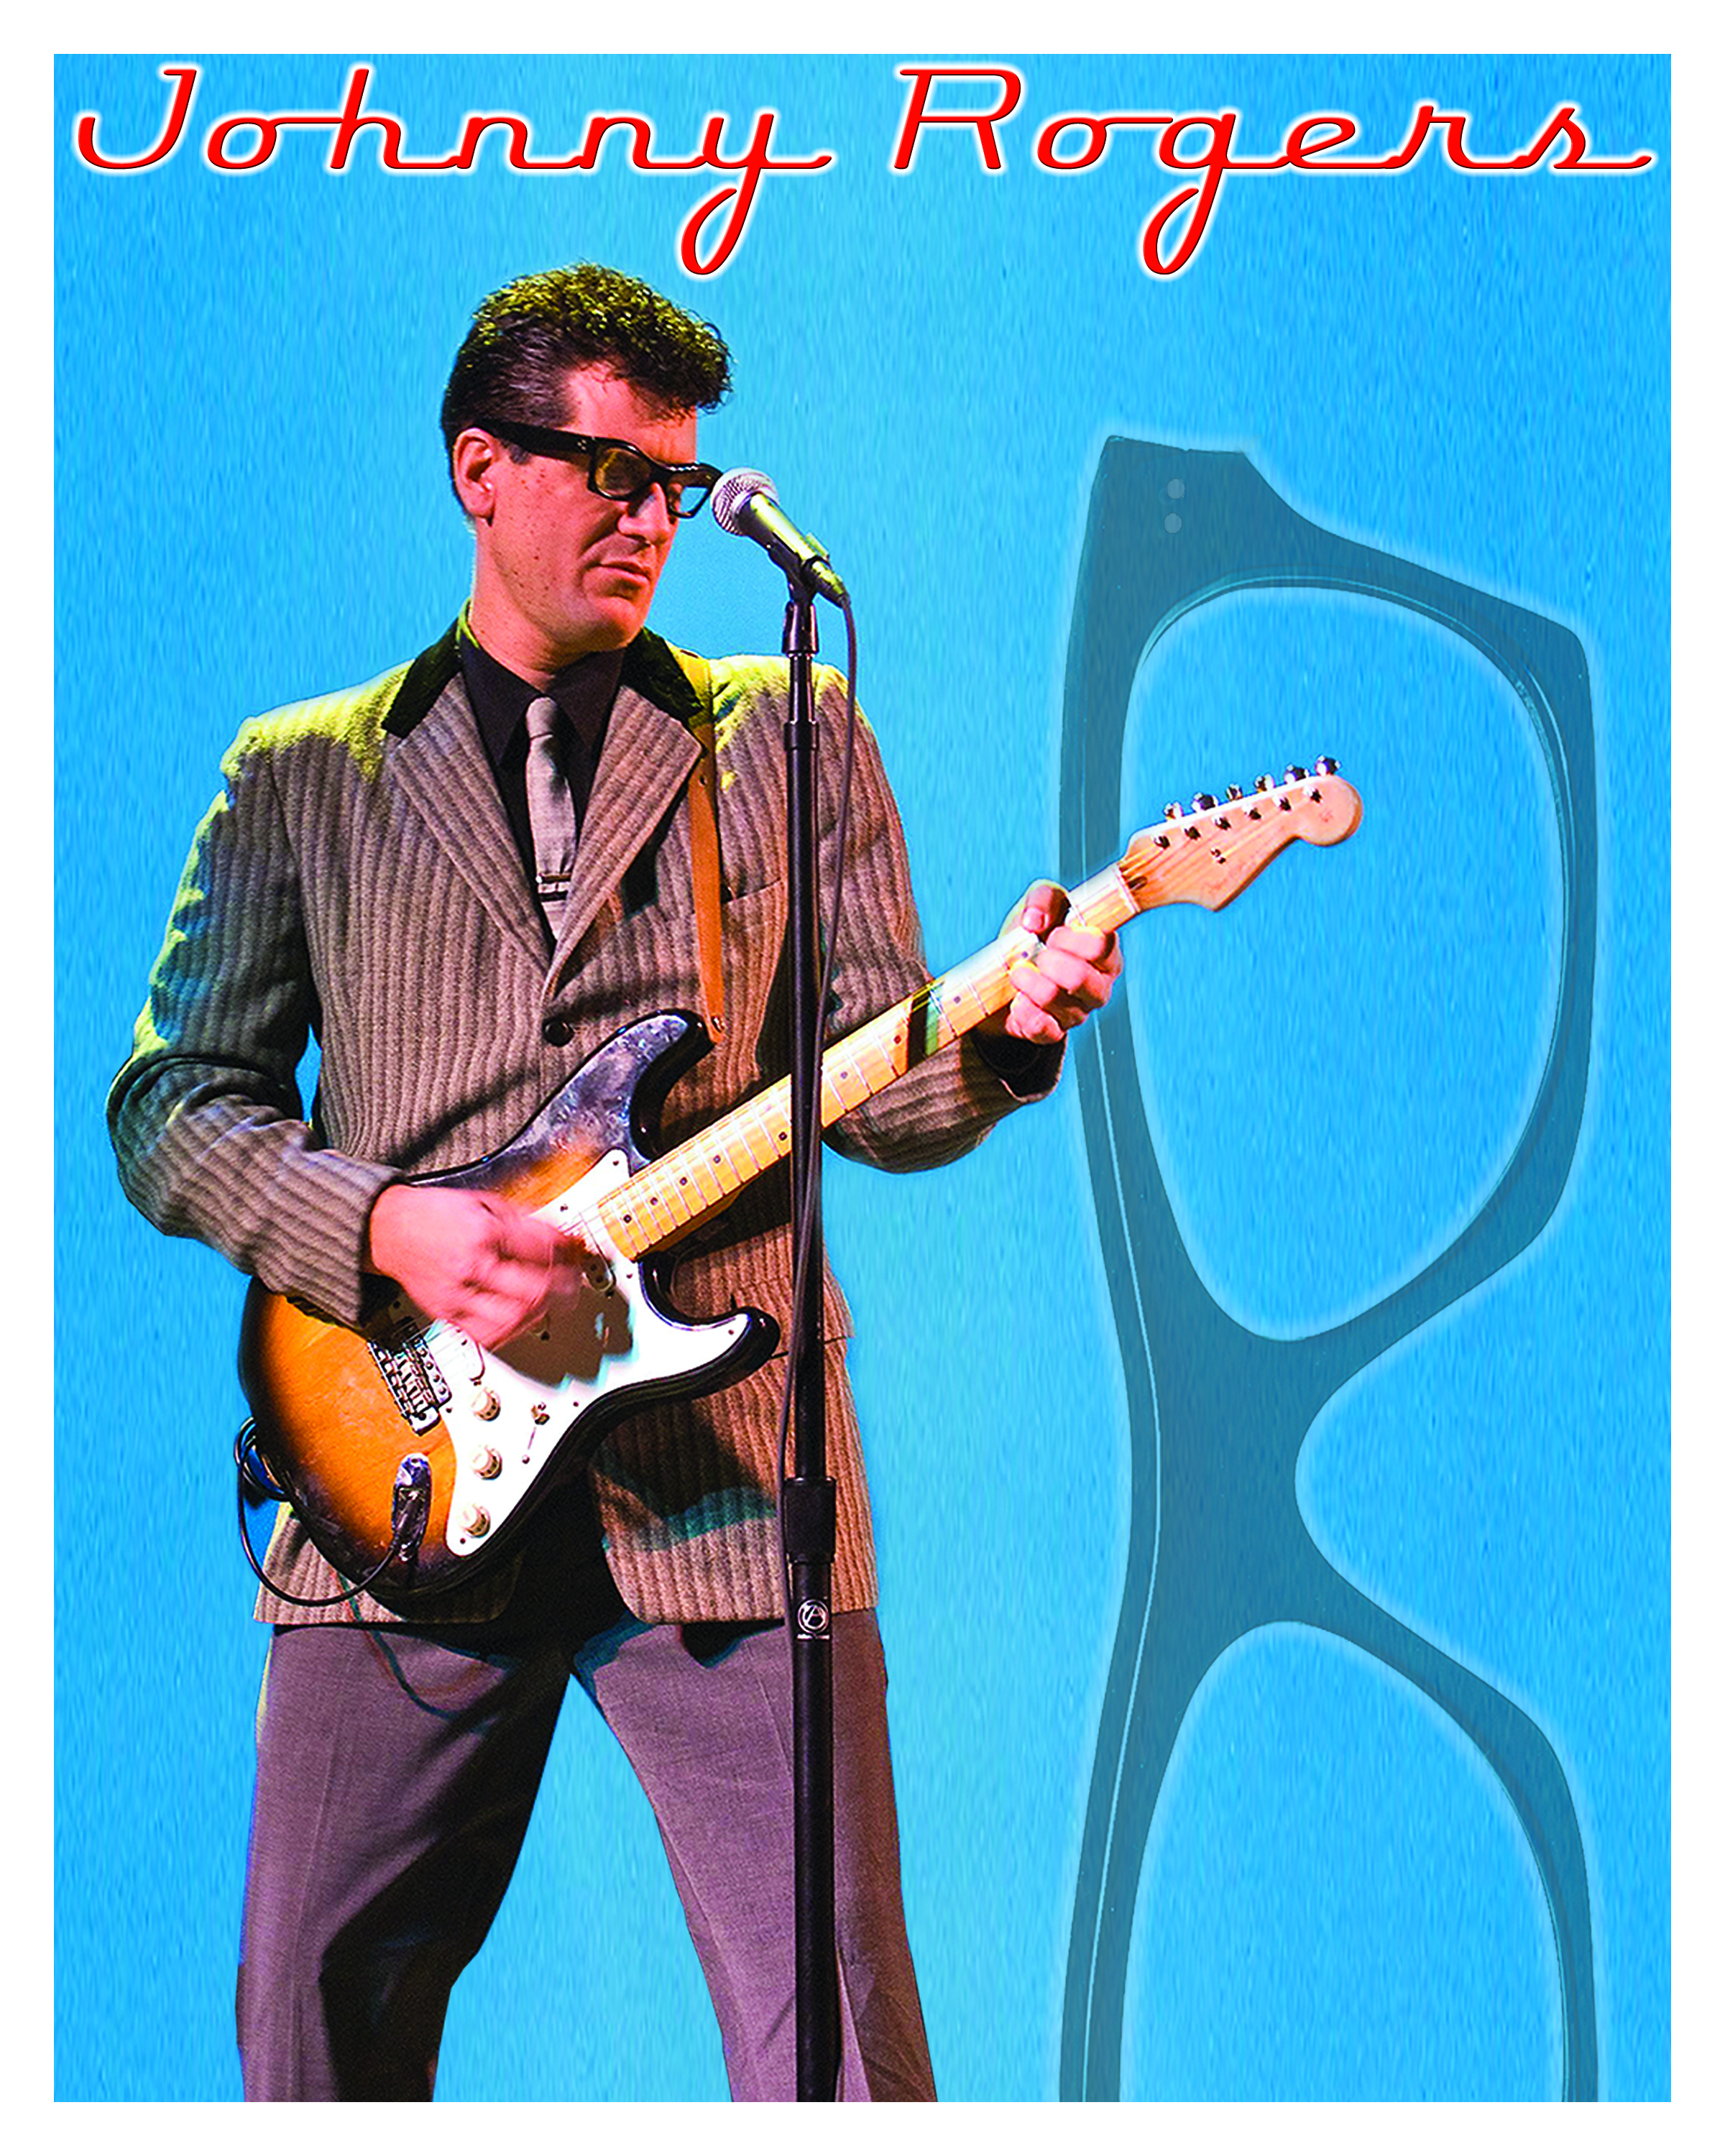 TRIBUTE TO BUDDY HOLLY, ROY ORBISON & more with JOHNNY ROGERS!! 1-22-22